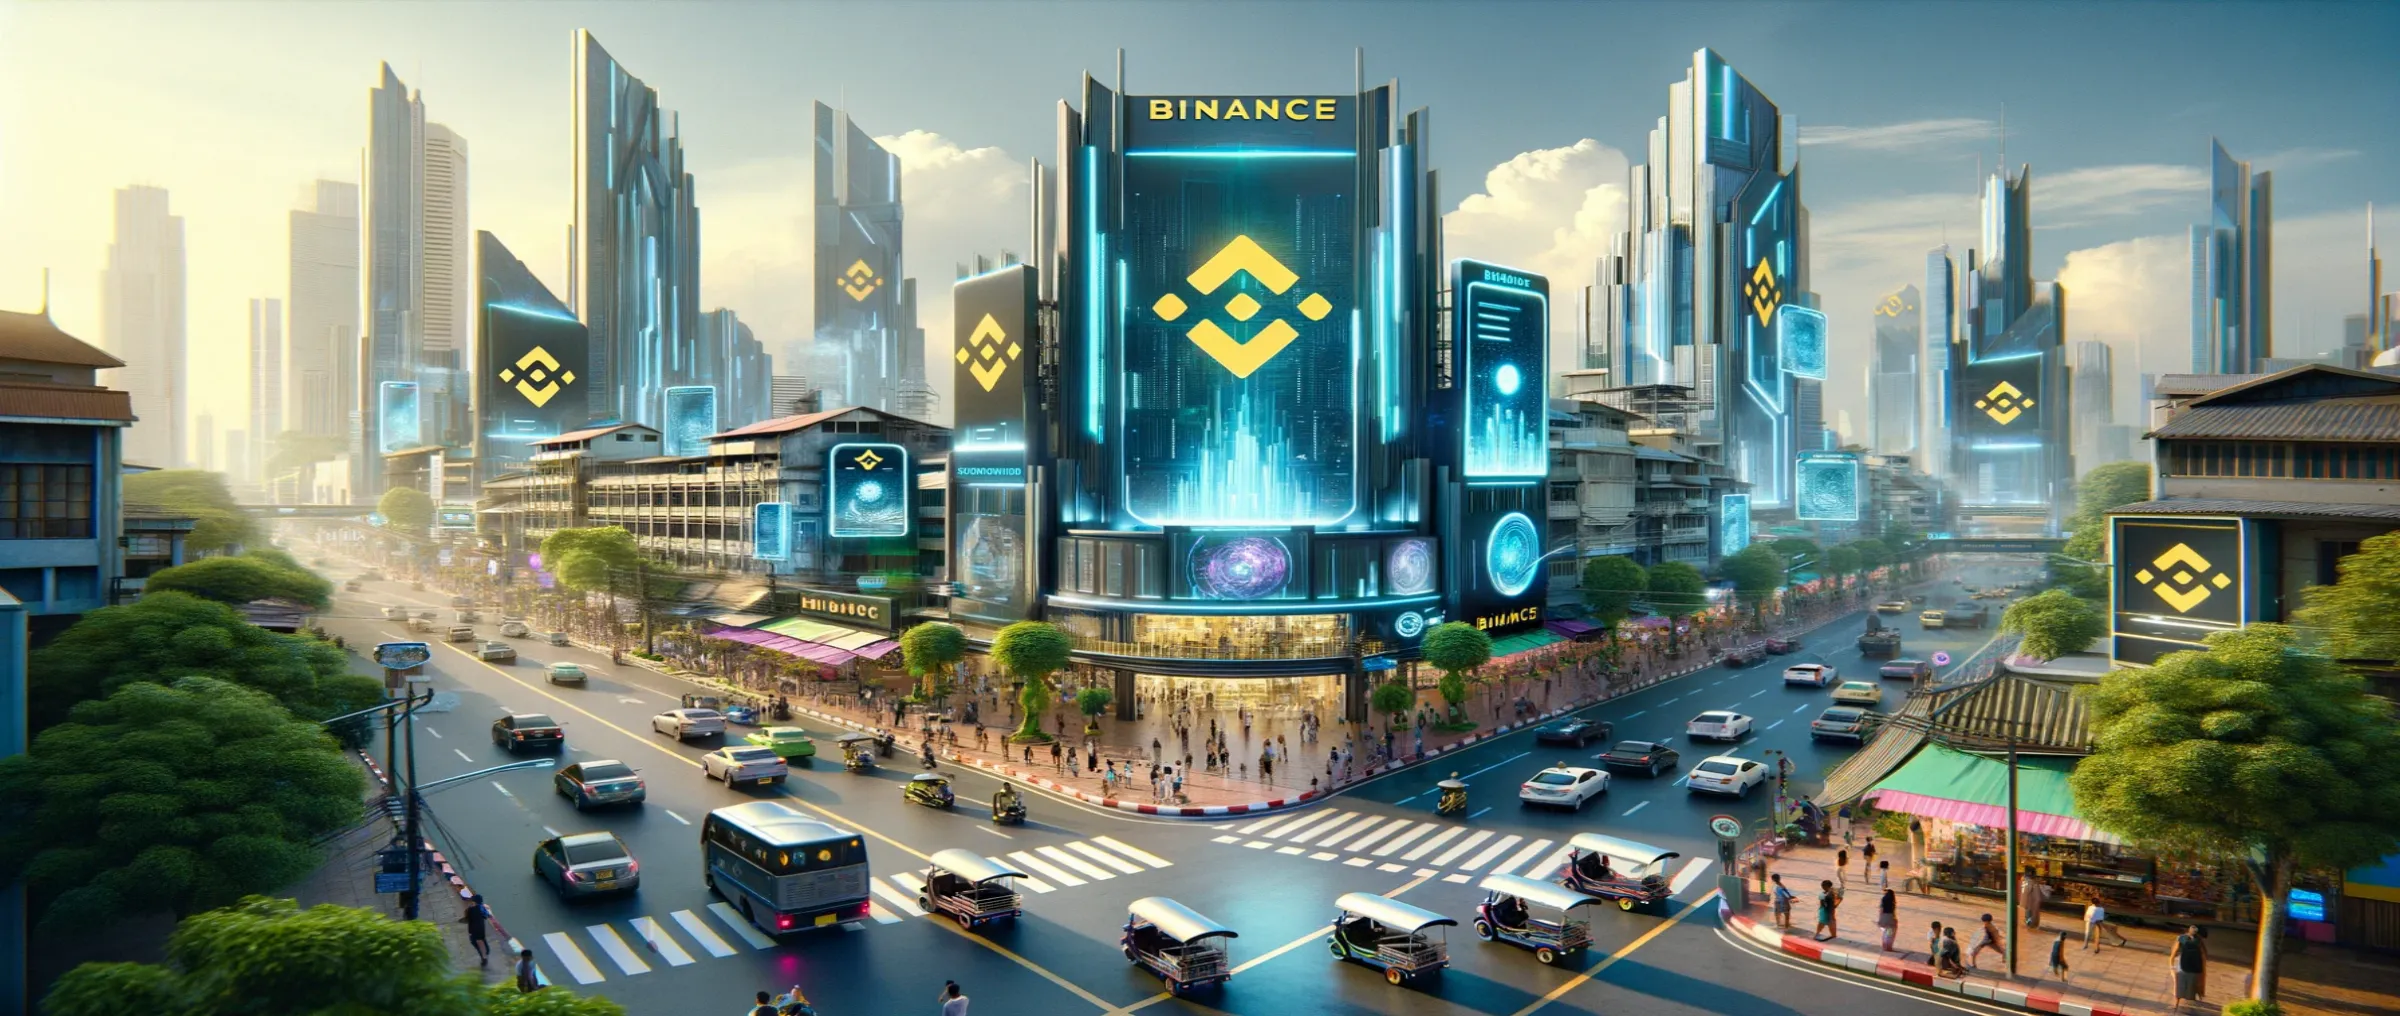 Binance has launched its operations in Thailand